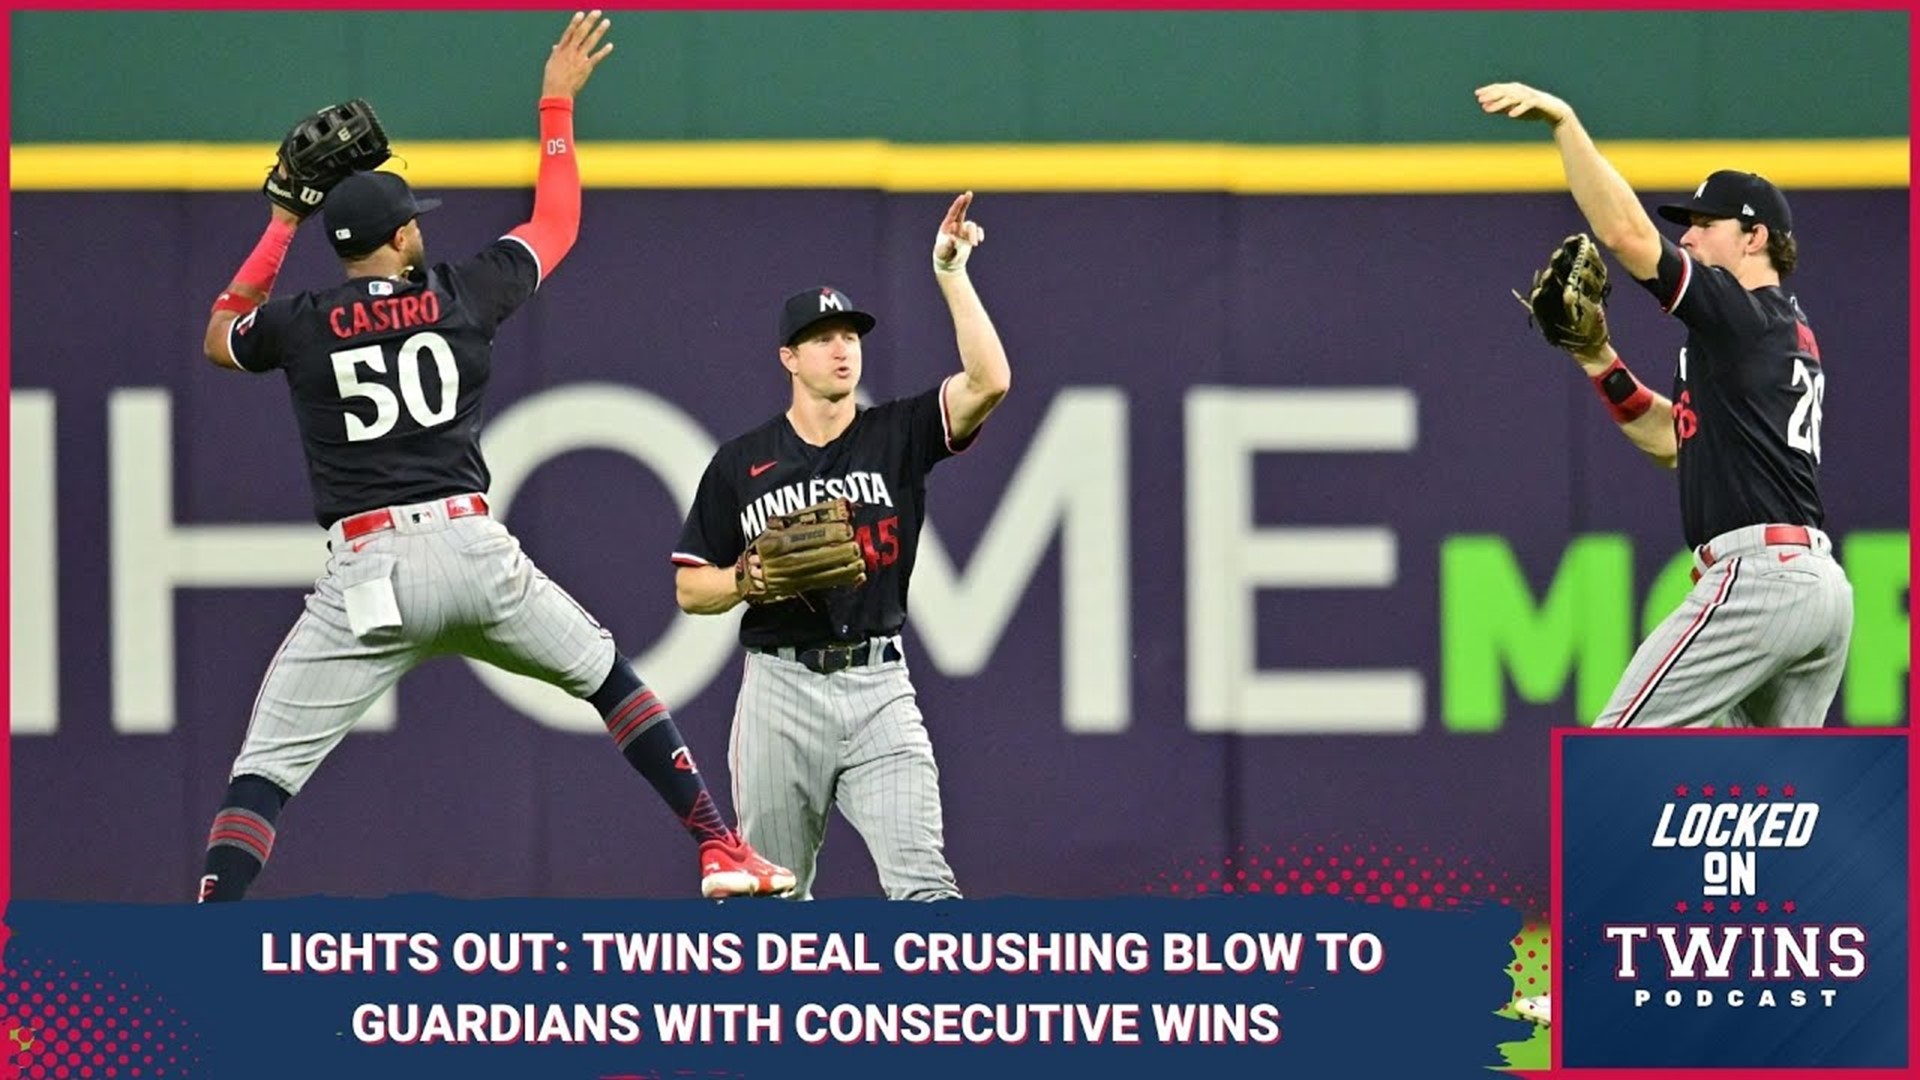 Twins Deal Second Critical Blow to Guardians' AL Central Chances with 8-3 Win